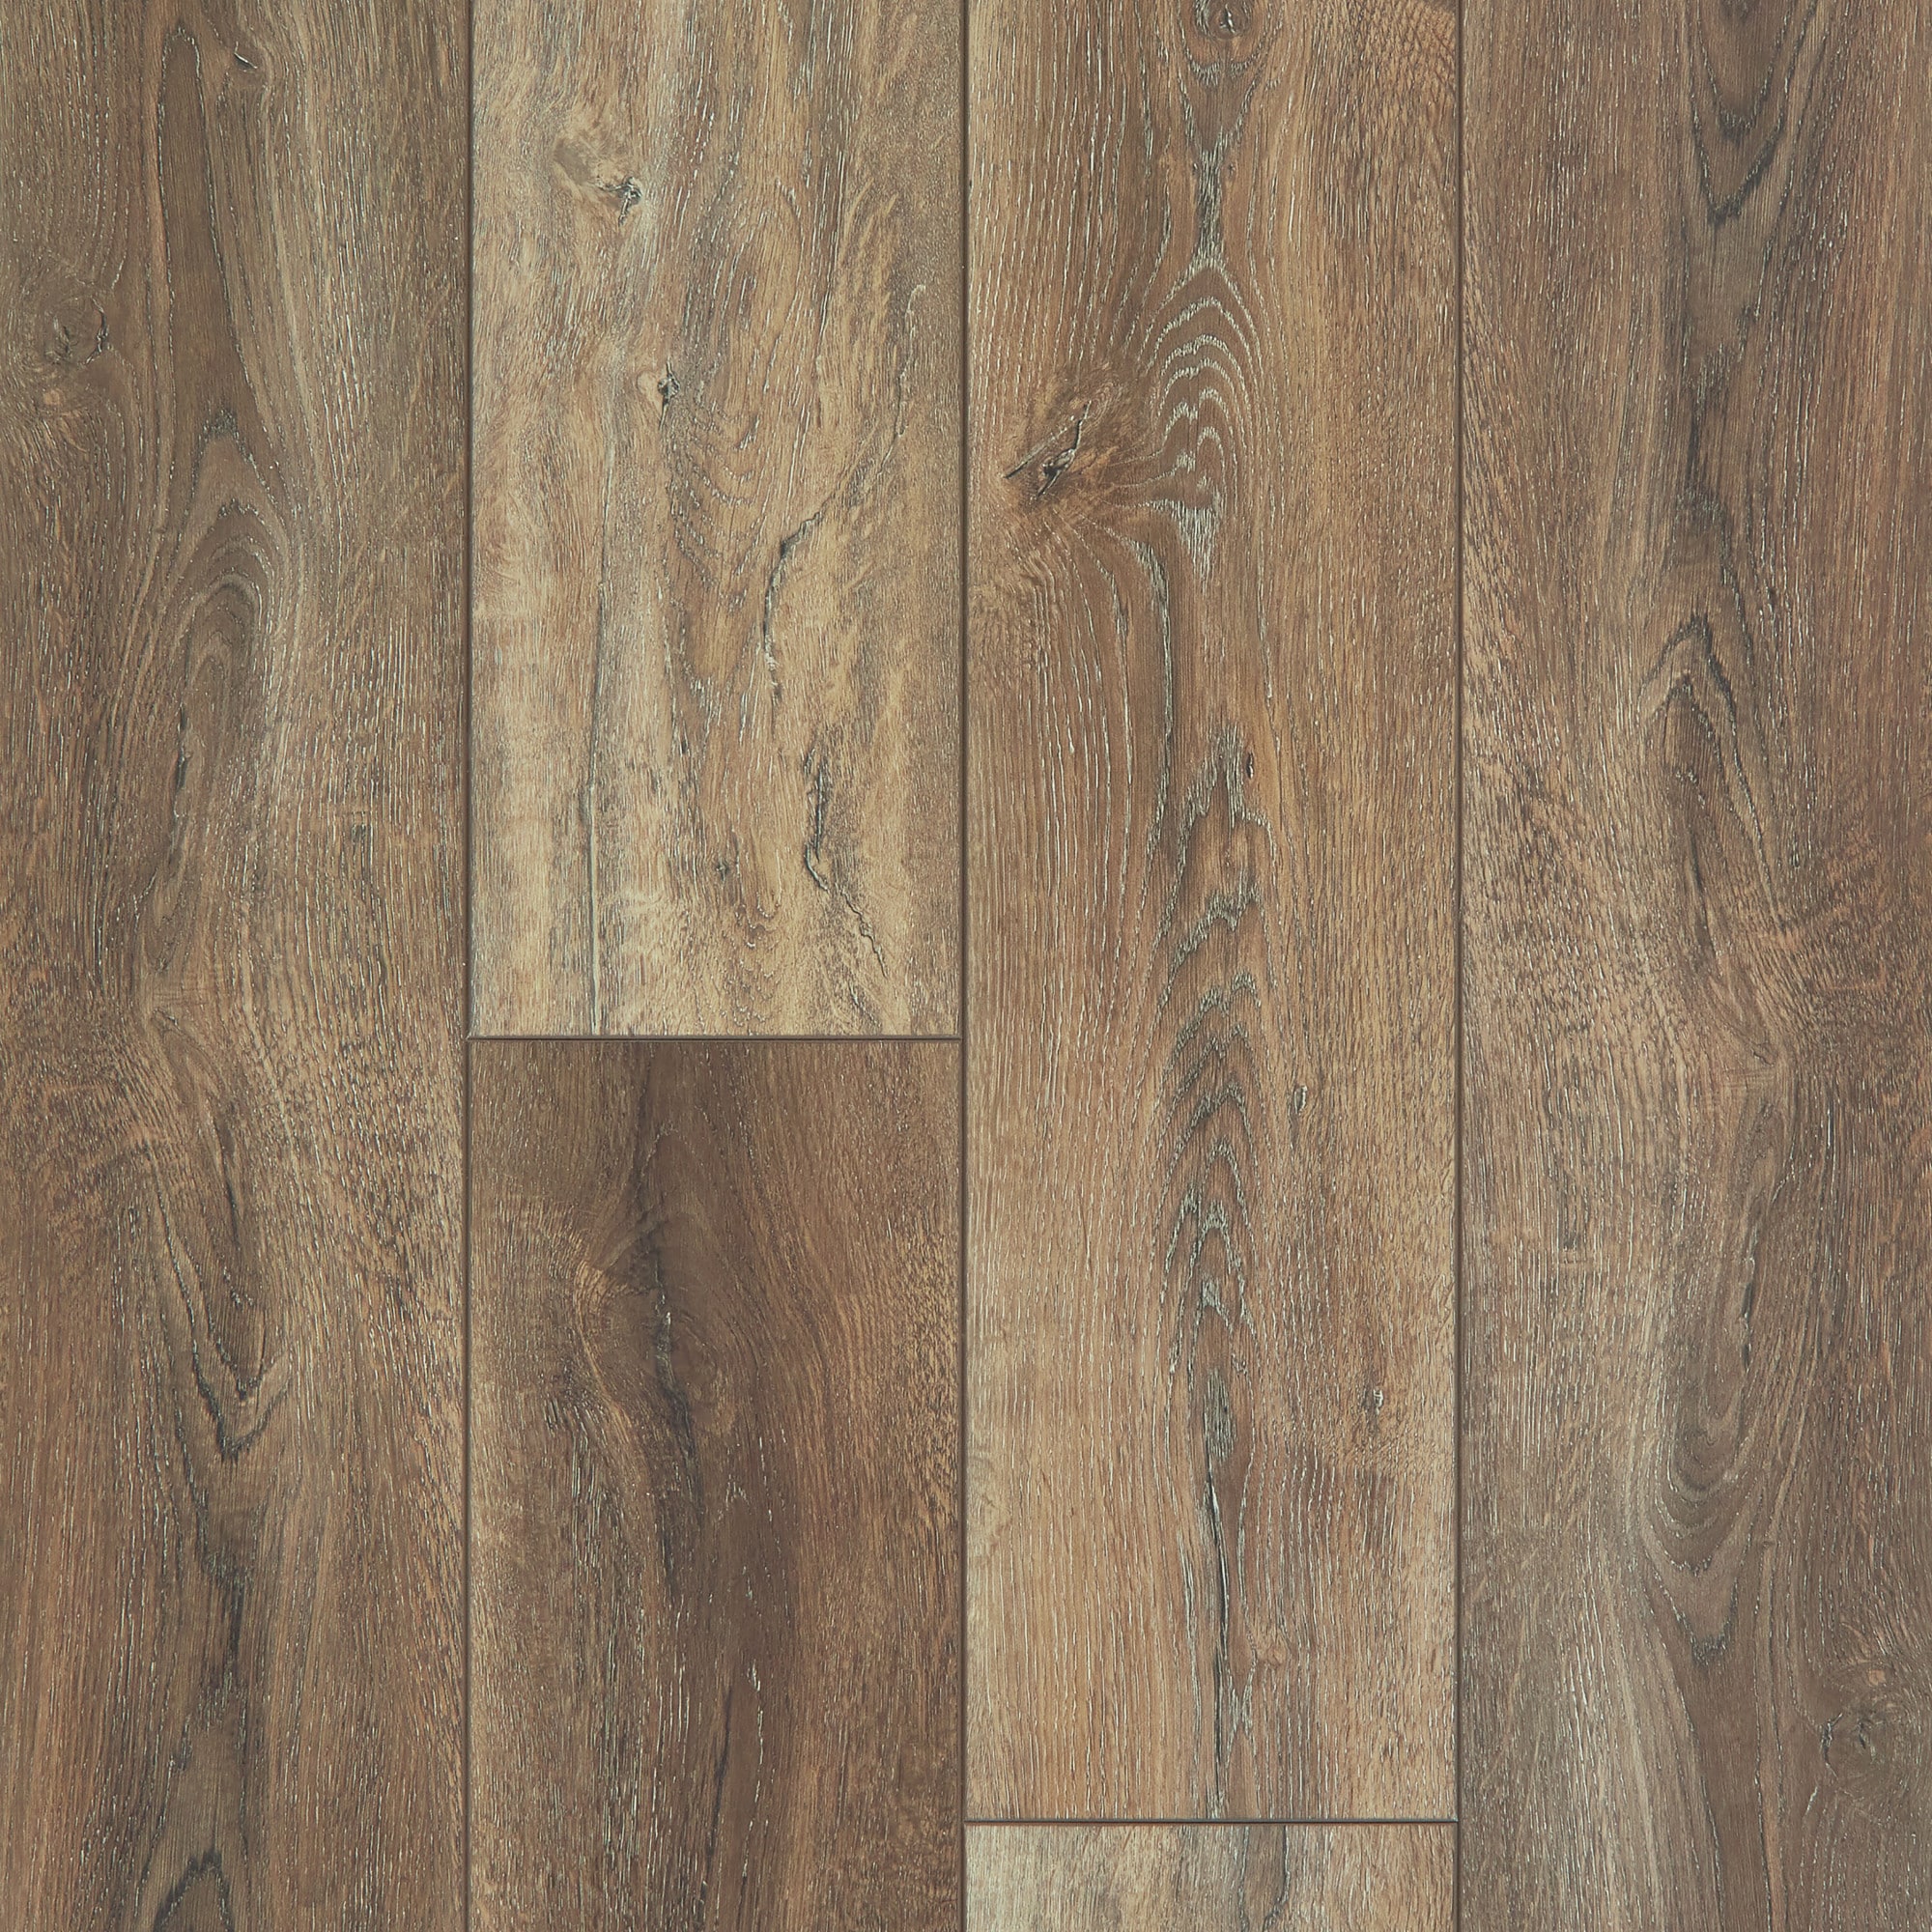 Shaw Parallax Hd Plus Poised 7 In Wide, Shaw Luxury Vinyl Plank Flooring Colors